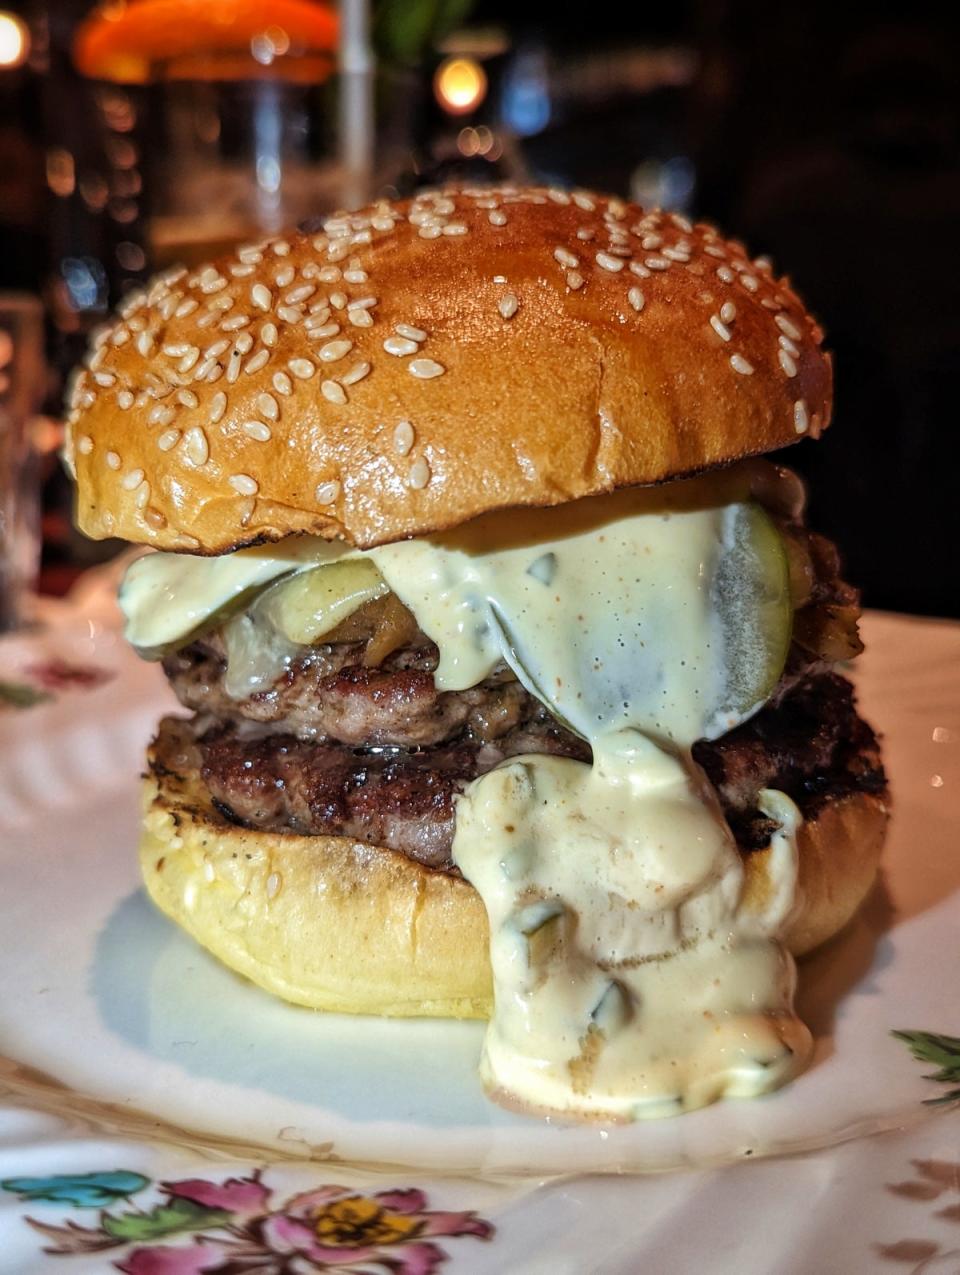 Blacklock’s burger proves it isn’t just the place for steaks and chops (Amira Arasteh)